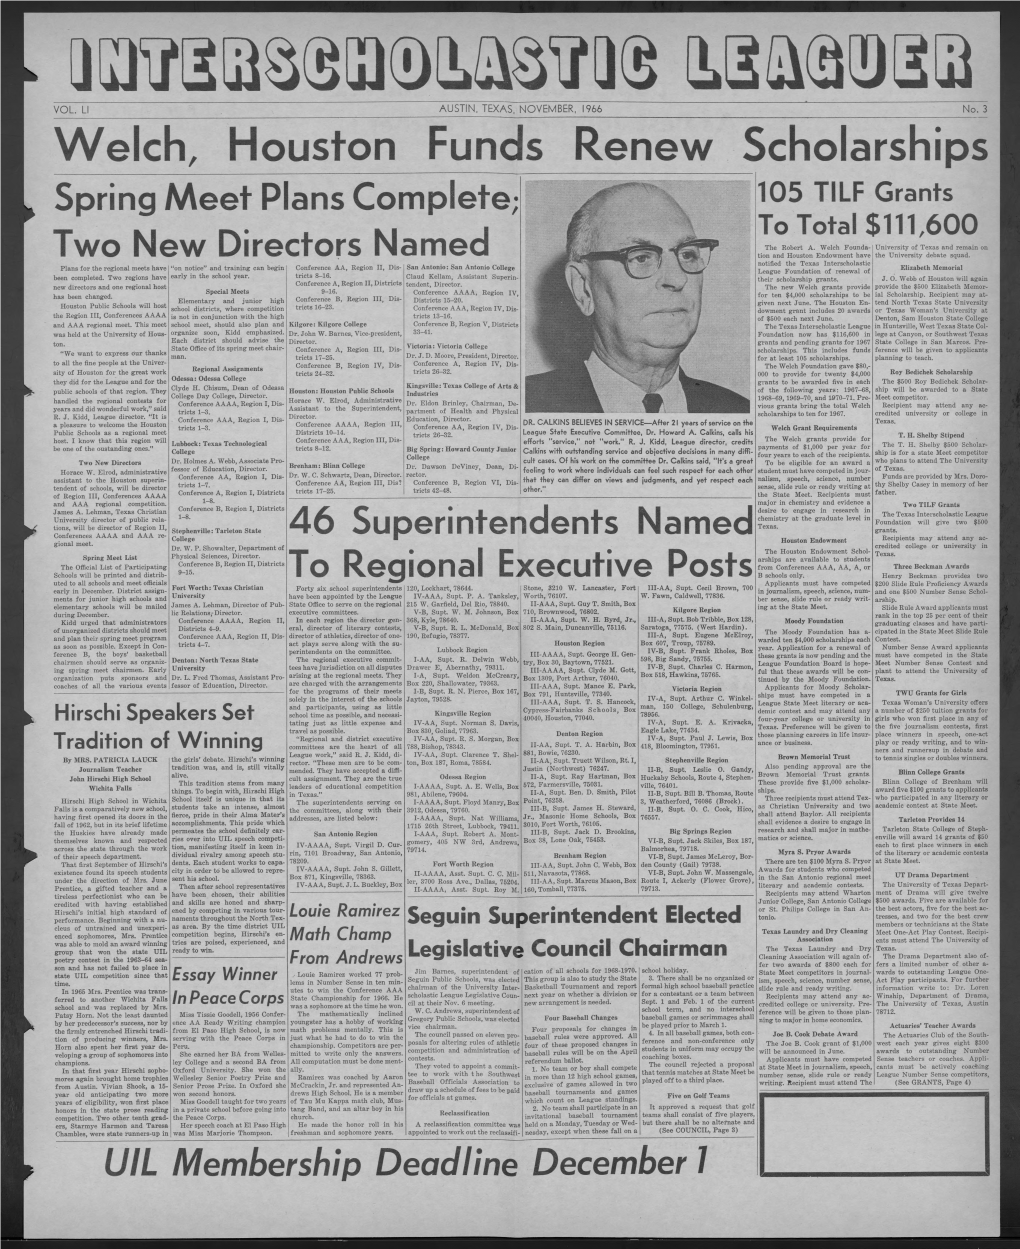 Welch, Houston Funds Renew Scholarships Spring Meet Plans Complete 105 TILF Grants to Total $111,600 the Robert A